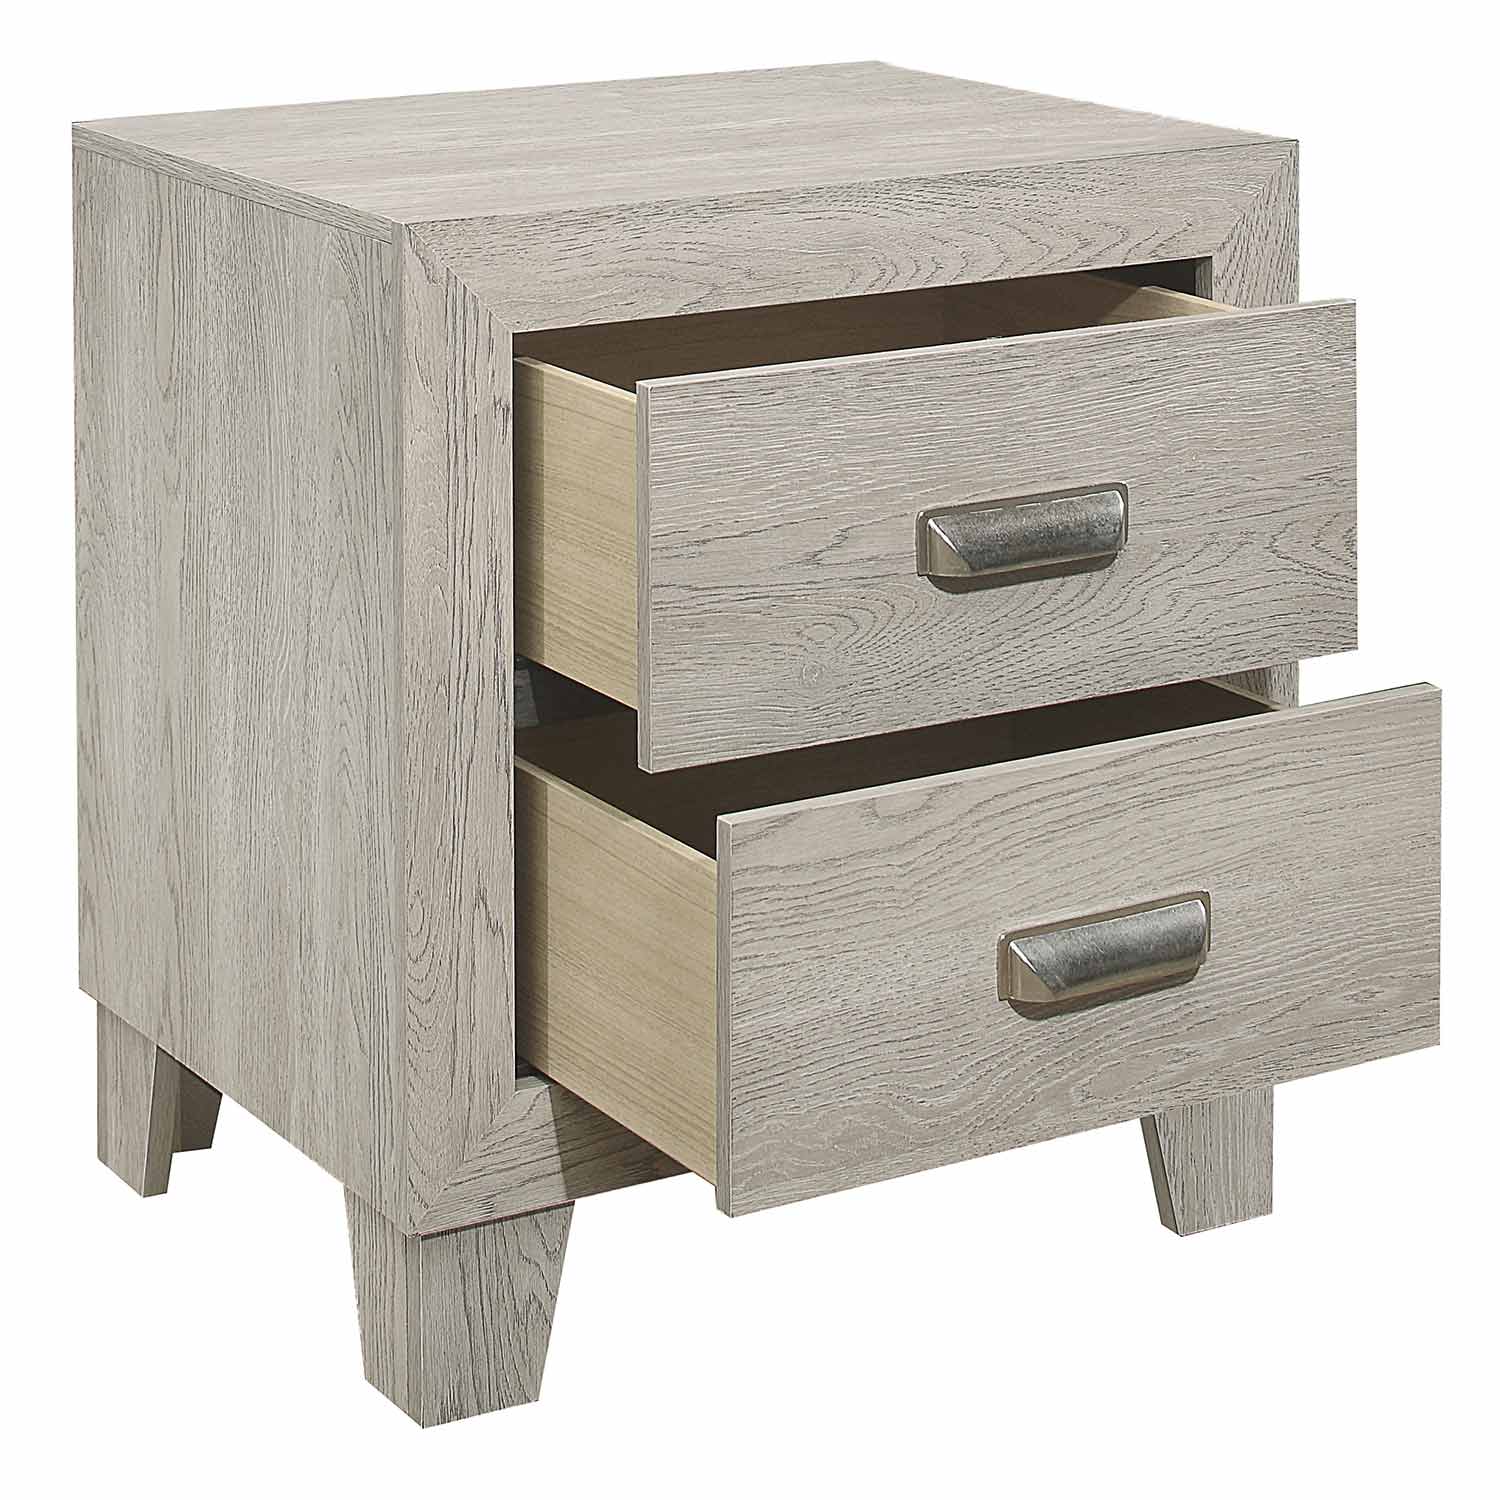 Homelegance Quinby Night Stand - Light Gray